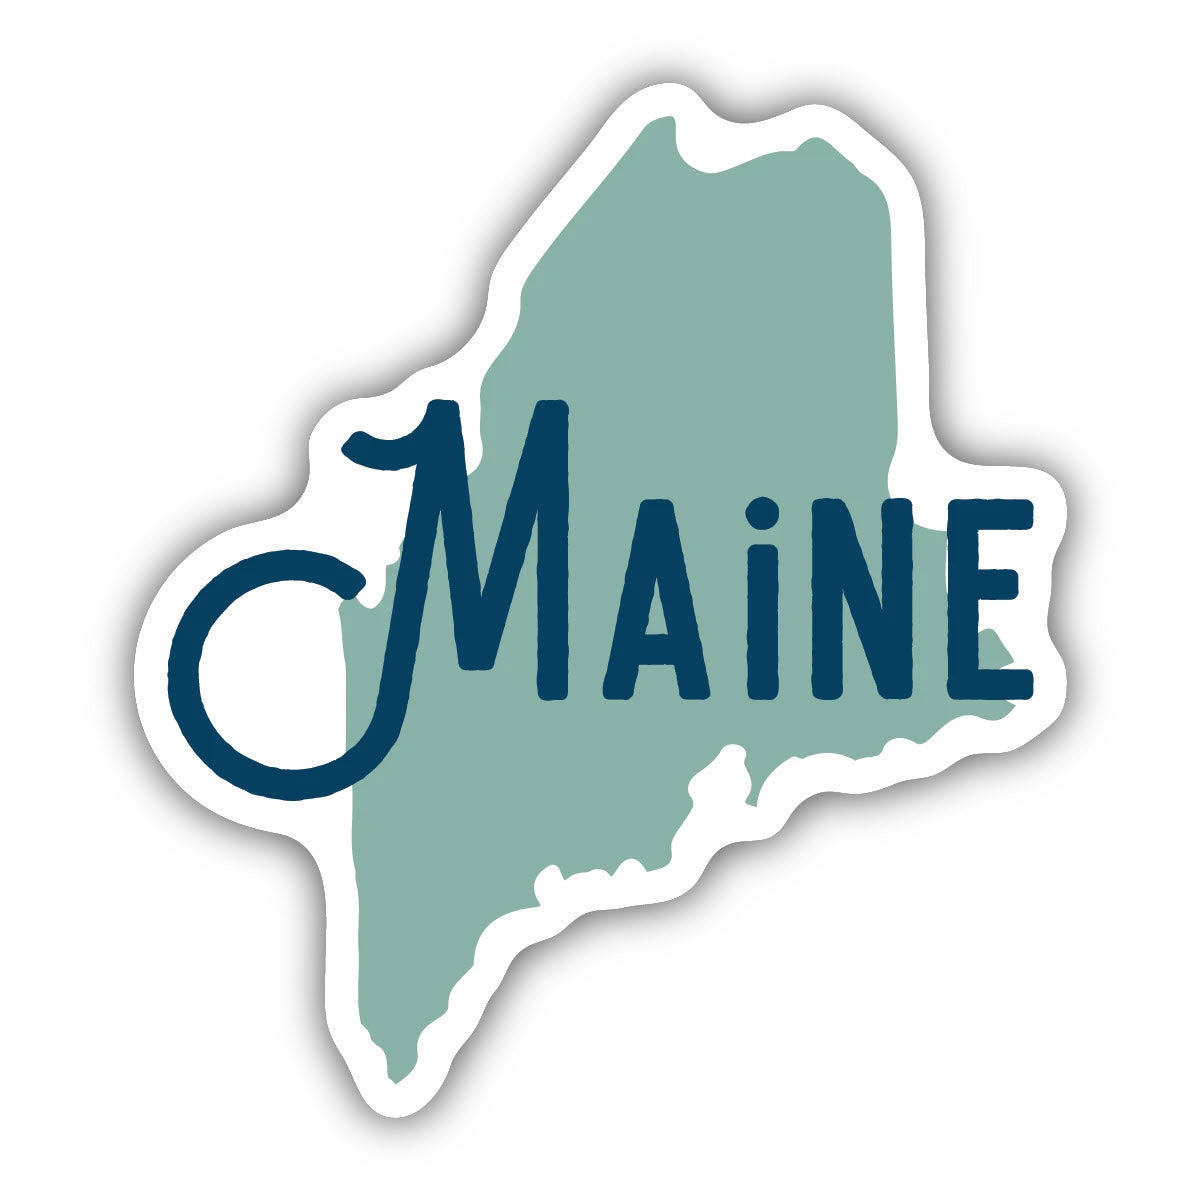 Stickers Northwest&#39;s Maine sticker design features the state of Maine&#39;s outline in teal with the word &quot;Maine&quot; superimposed in dark blue cursive, made to be weatherproof for water bottles.